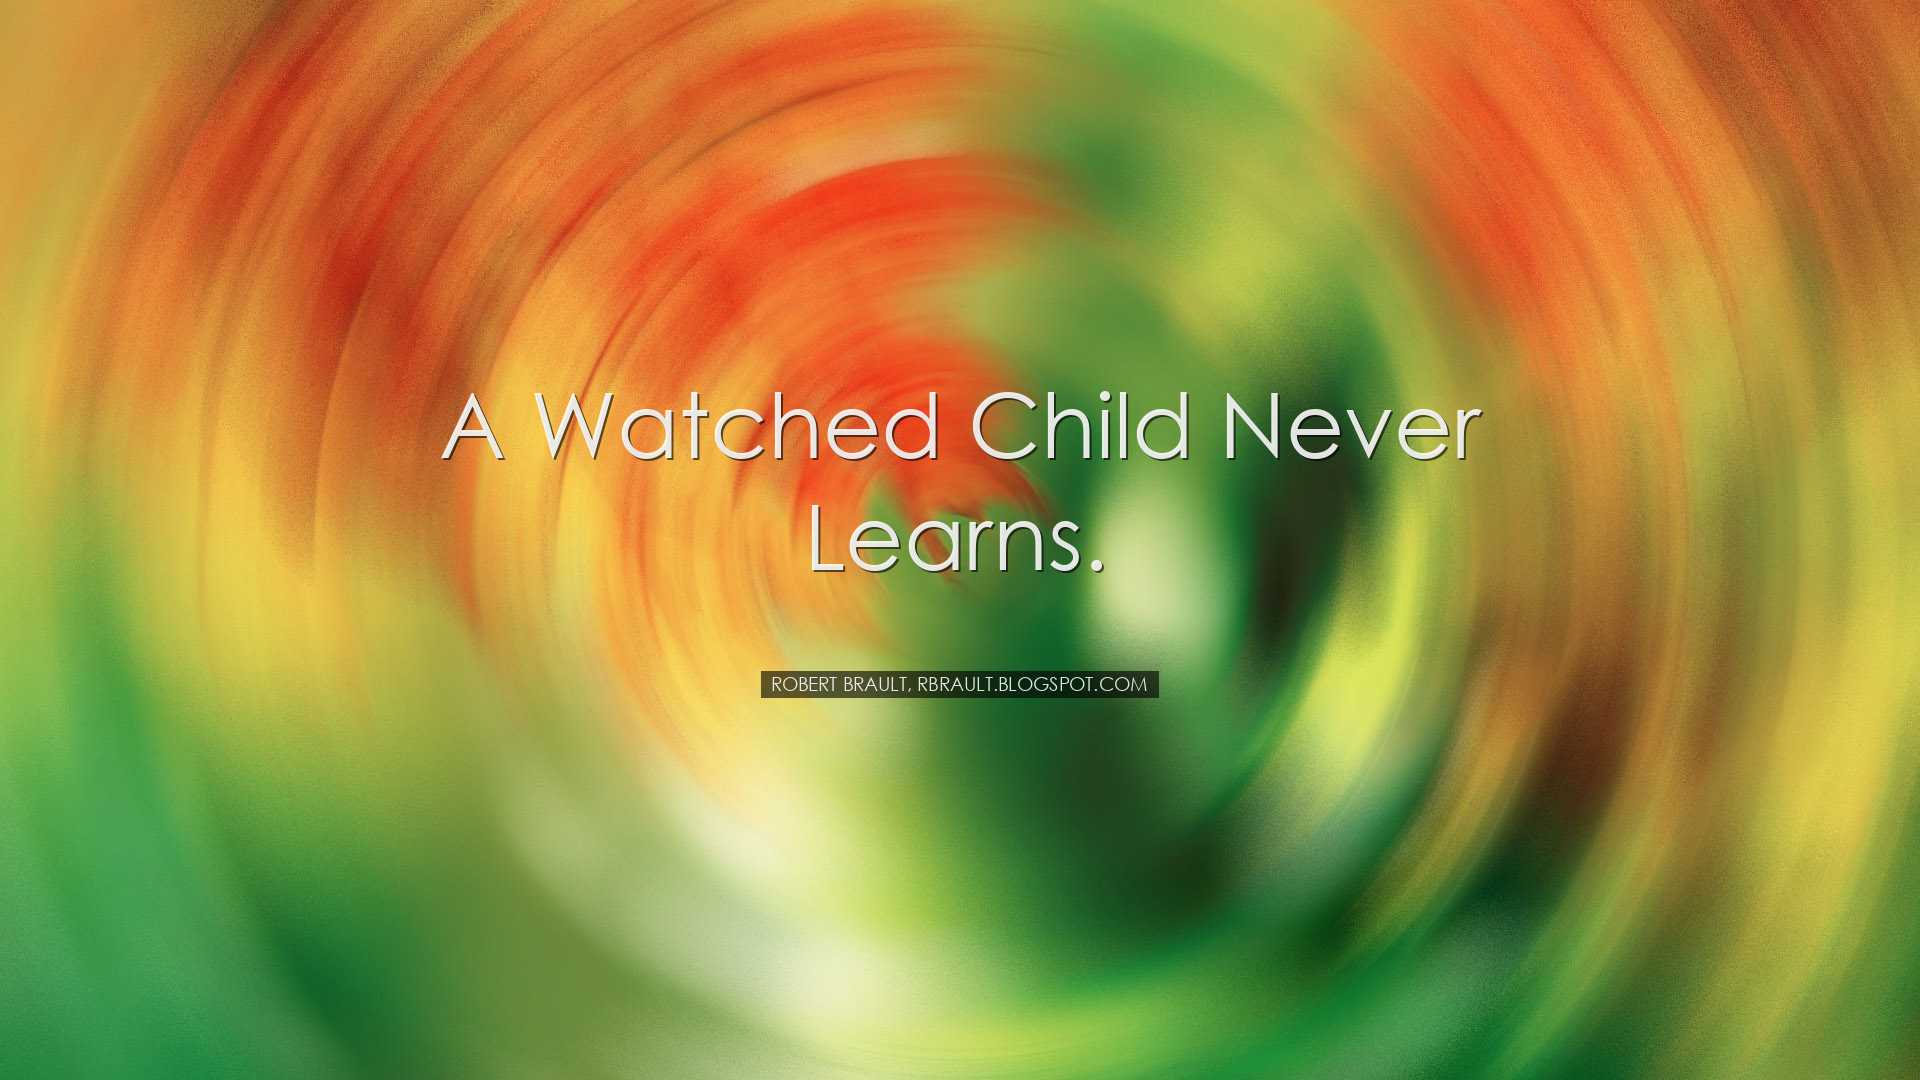 A watched child never learns. - Robert Brault, rbrault.blogspot.co